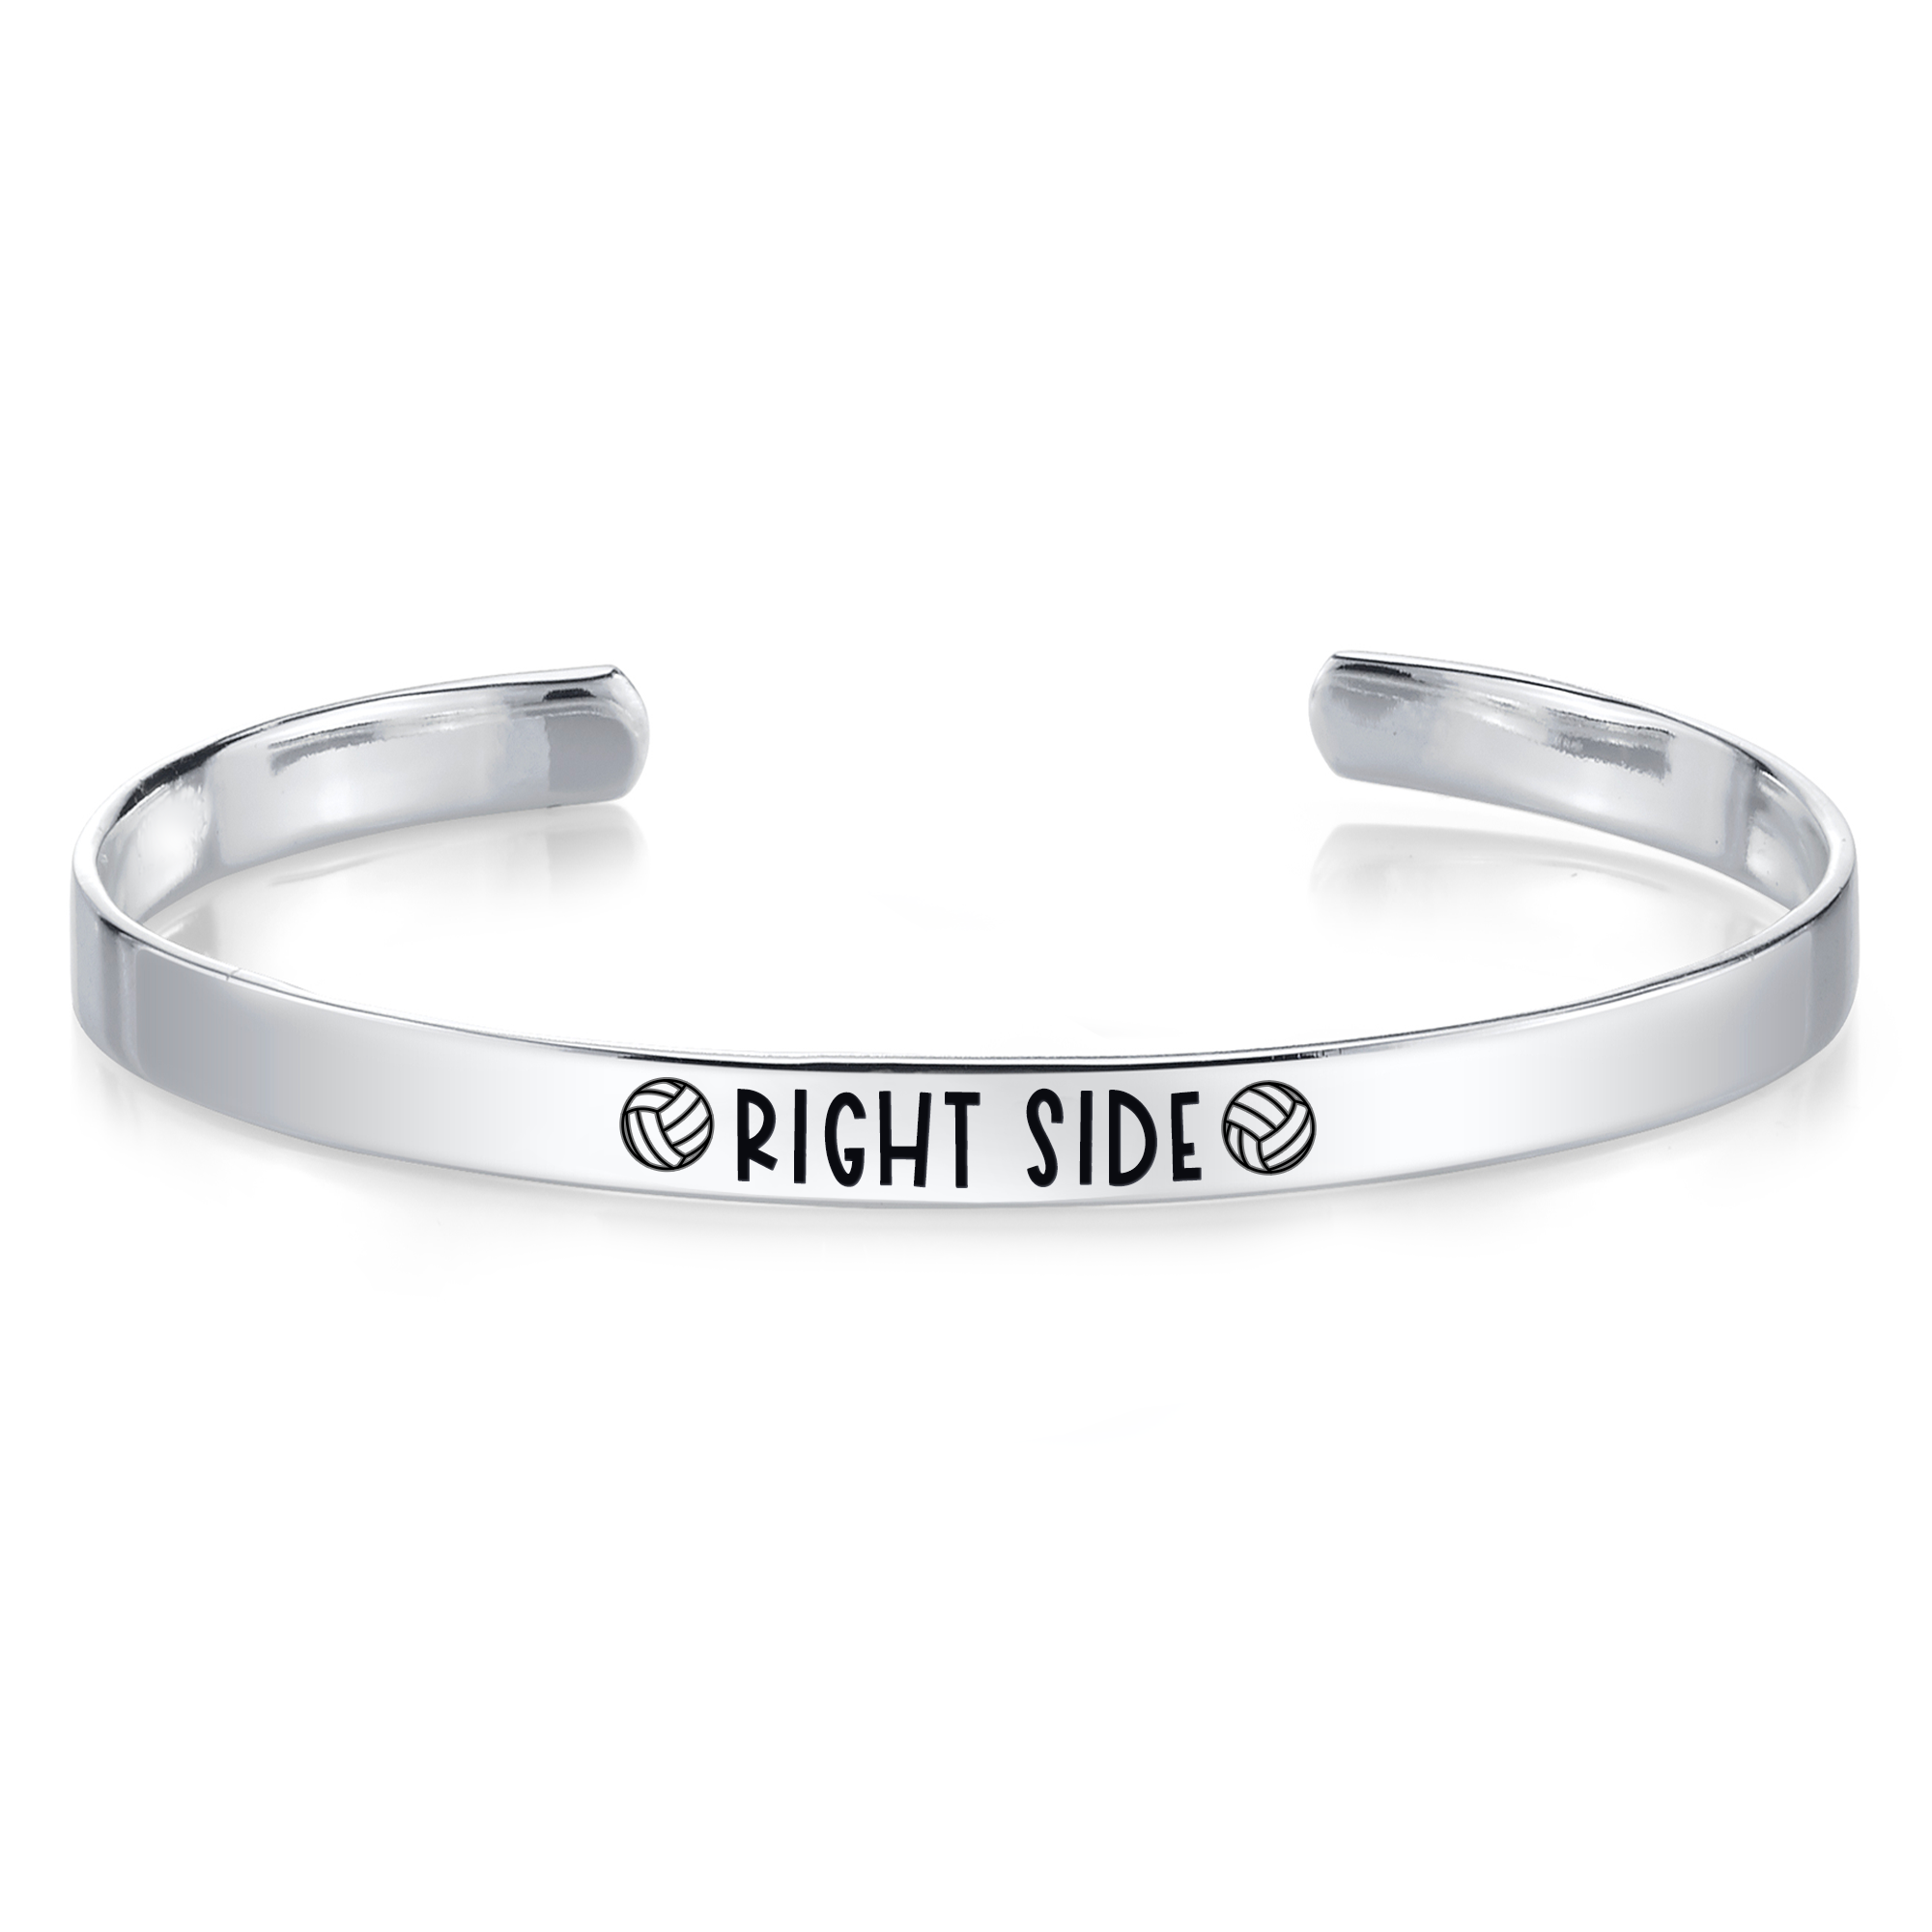 Right Side/Opposite Hitter - Volleyball Position Engraved Bangle